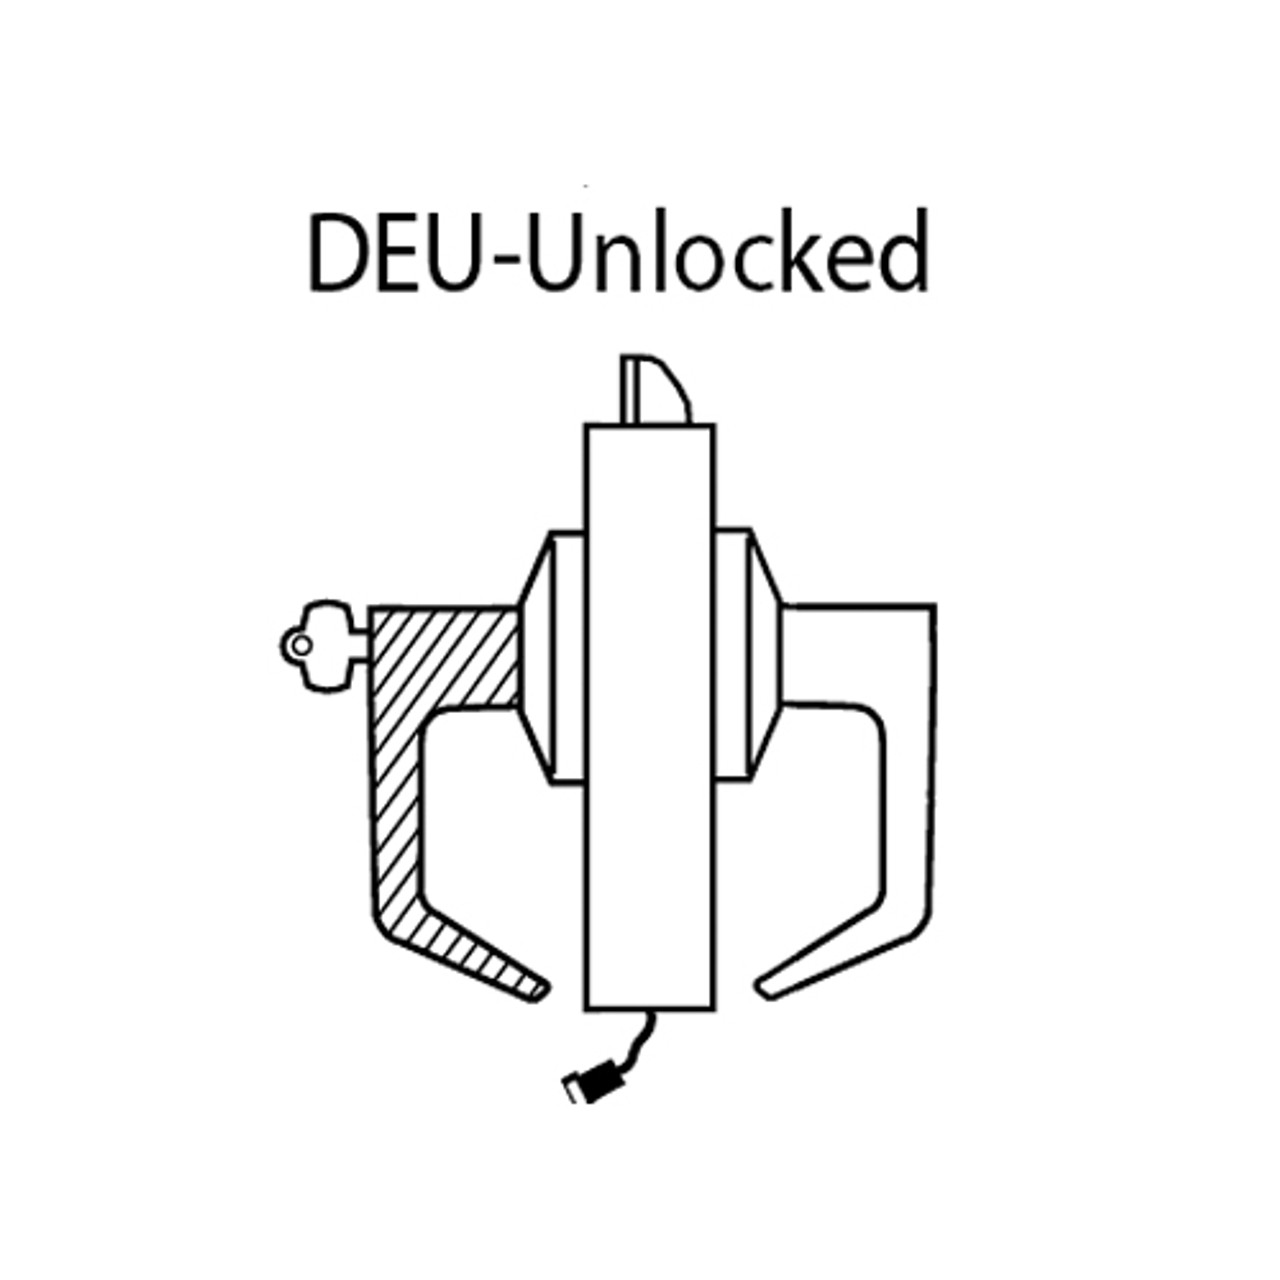 9KW37DEU16DSTK606 Best 9KW Series Fail Secure Electromechanical Heavy Duty Cylindrical Lock with Curved w/ No Return Style in Satin Brass